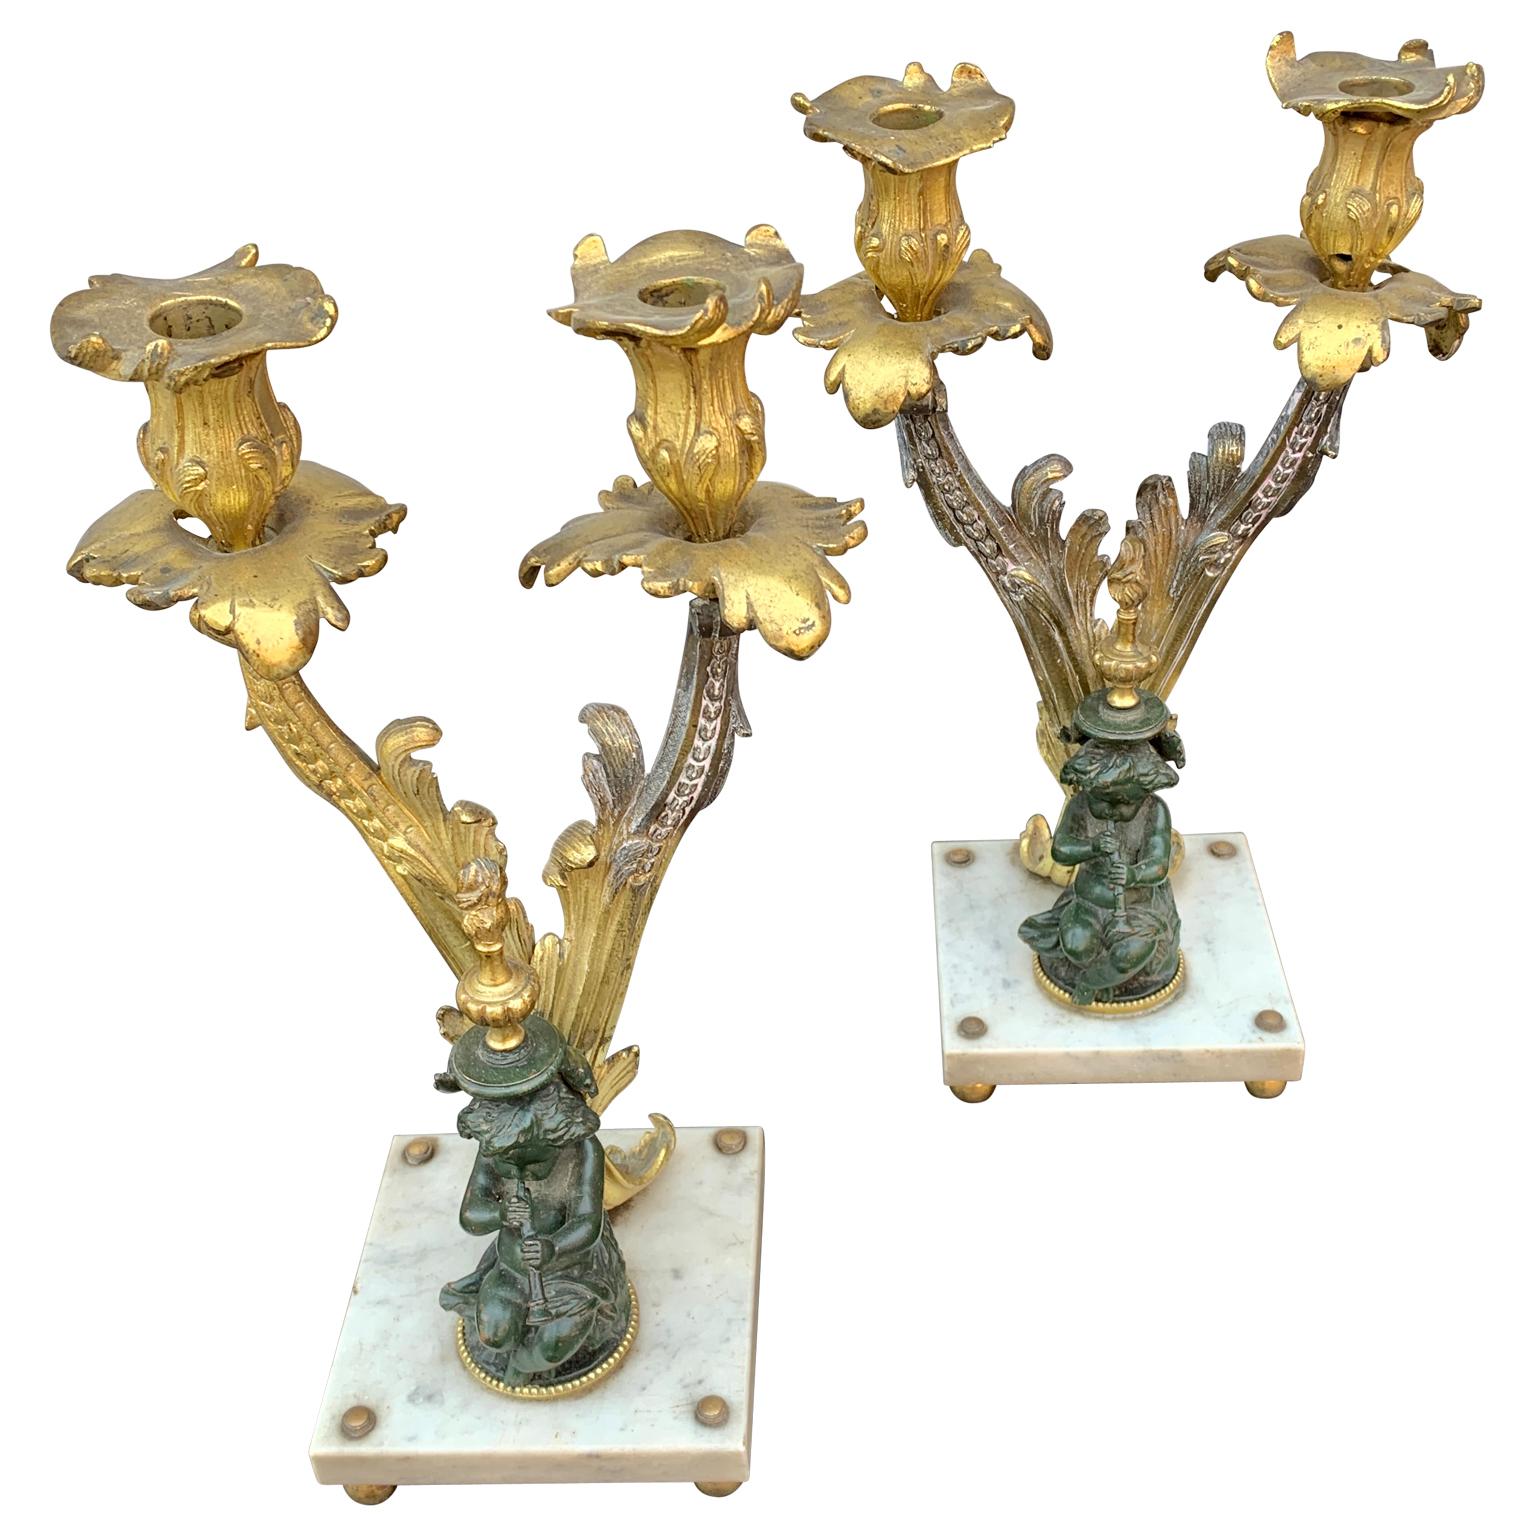 19th century pair of French gilded and bronze two-armed candelabra with Carrara marble square base and cast iron painted putties playing the flute. 
From the second part of 19th century. They are presented in old patina and unpolished to keep the